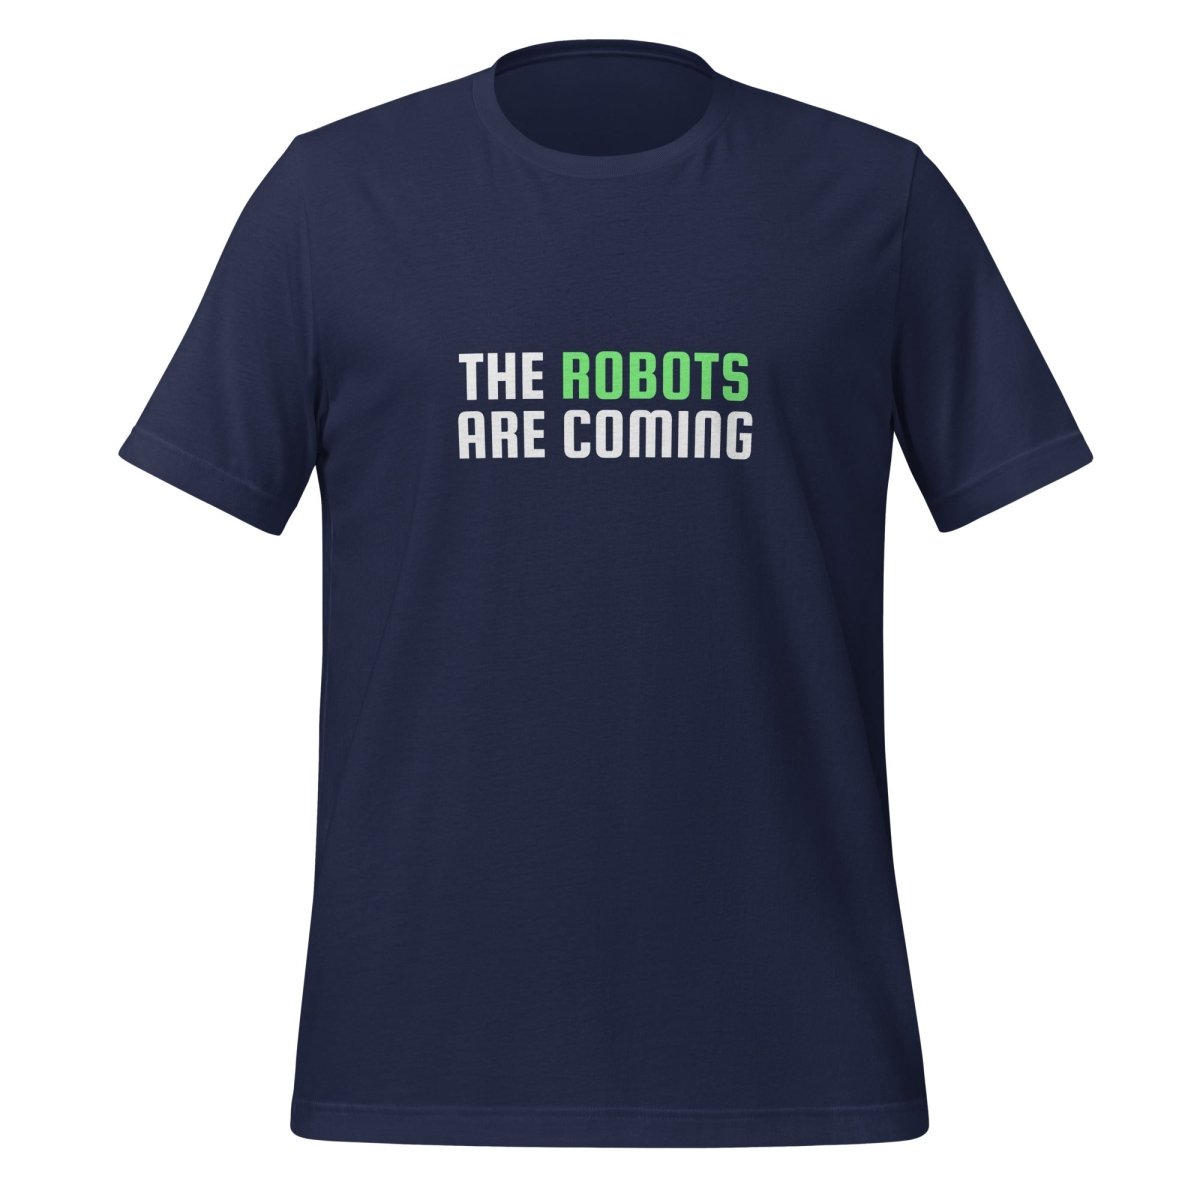 The Robots Are Coming (Green) T - Shirt 2 (unisex) - Navy - AI Store